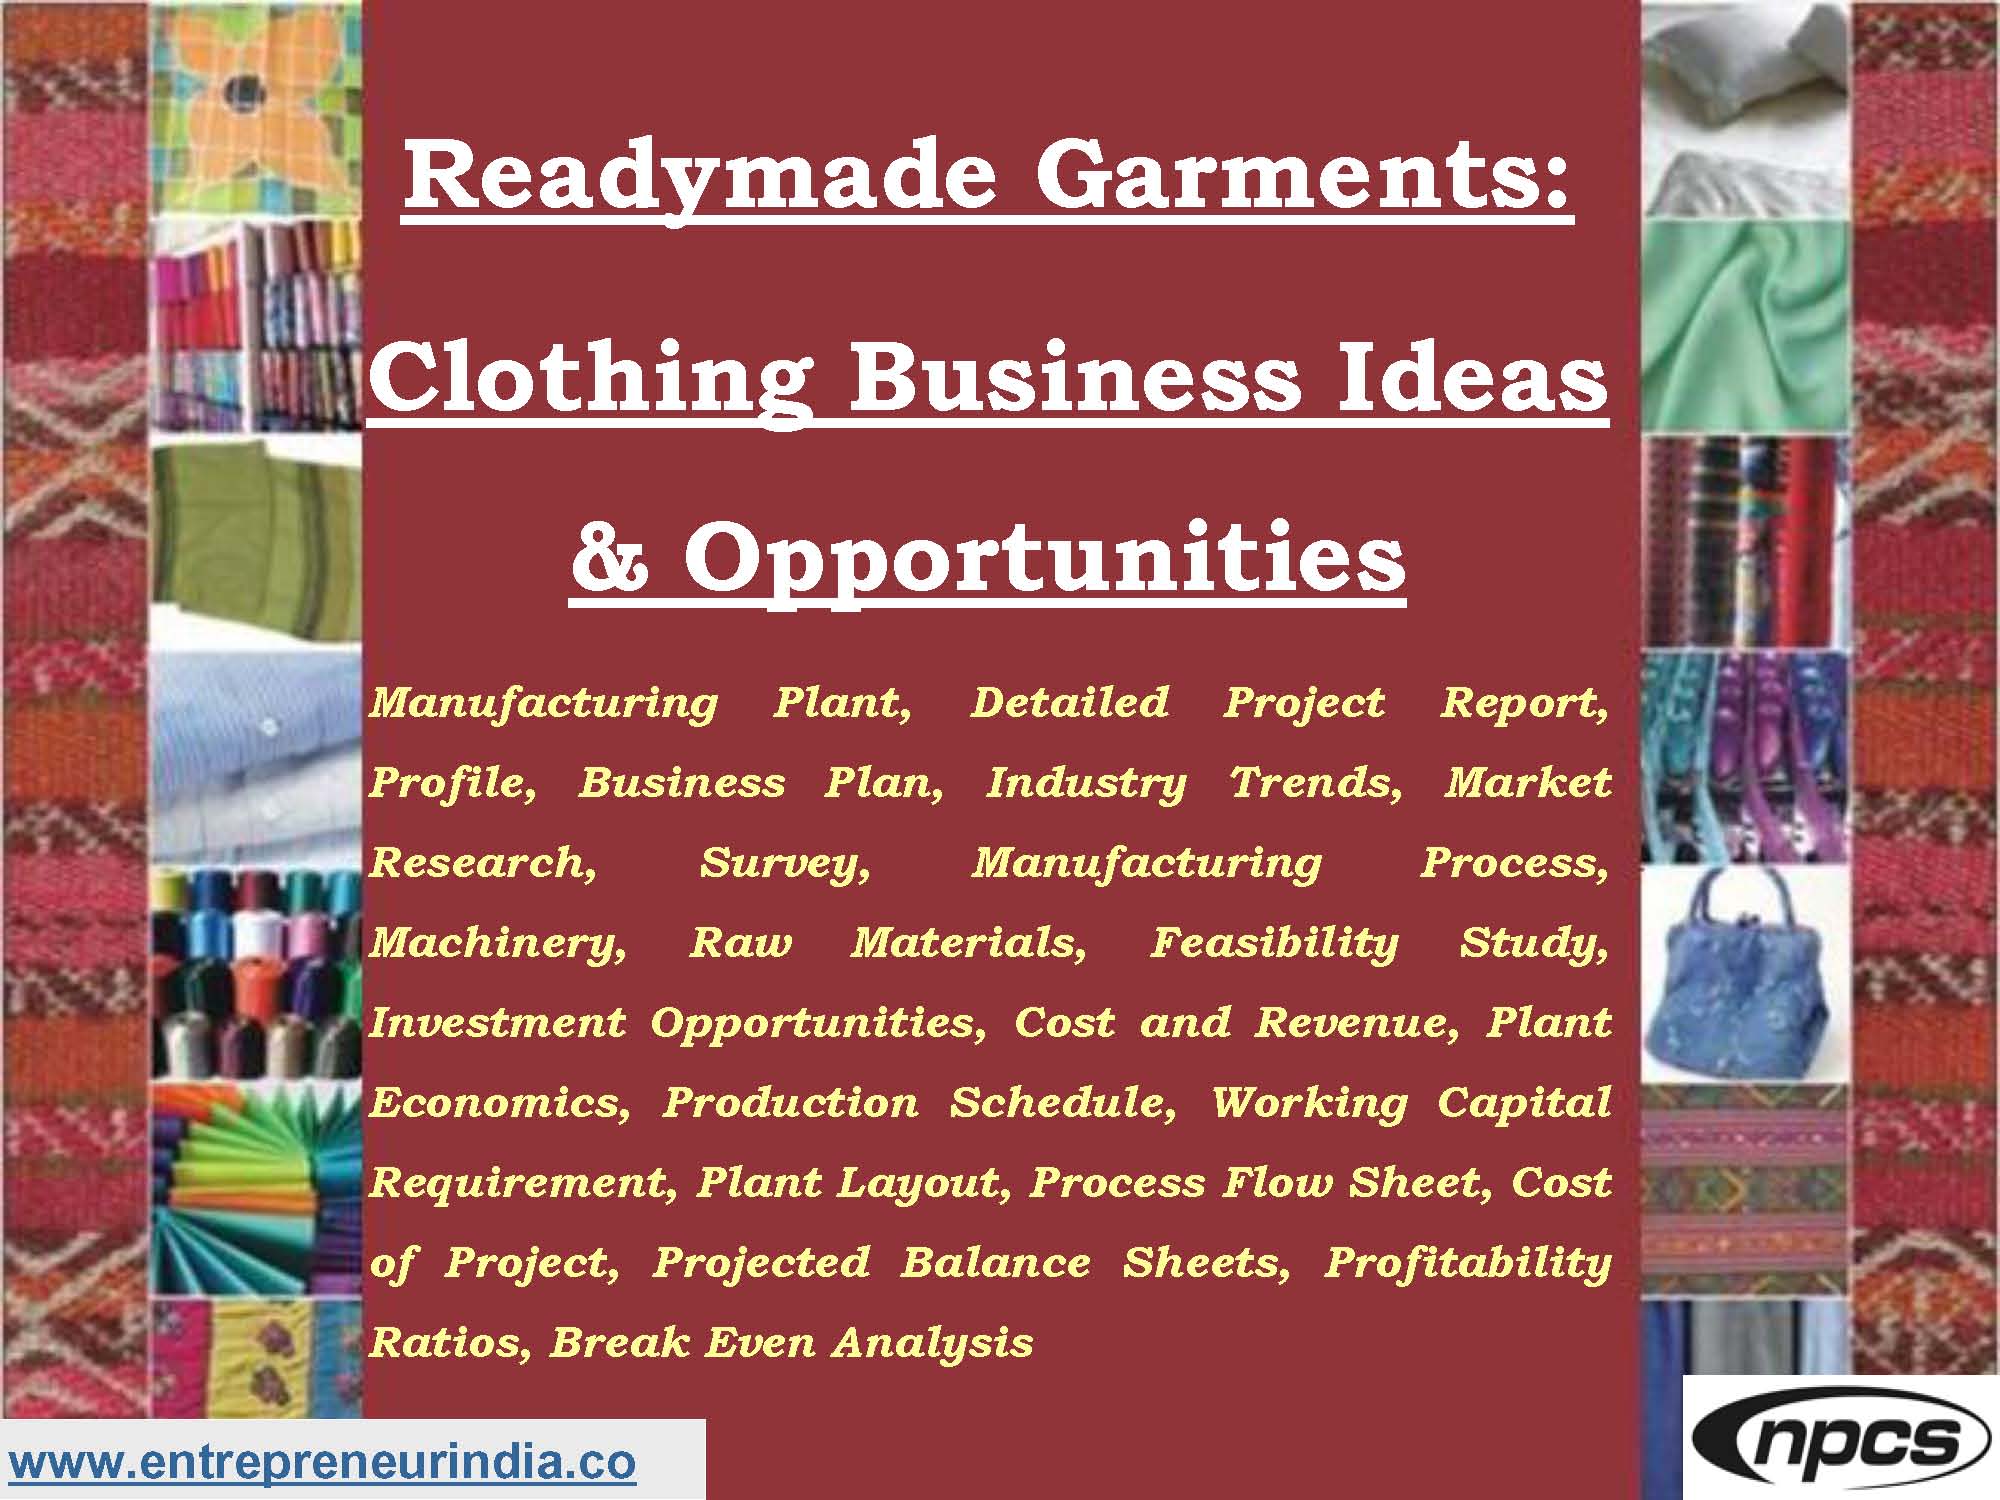 business plan for readymade garments shop